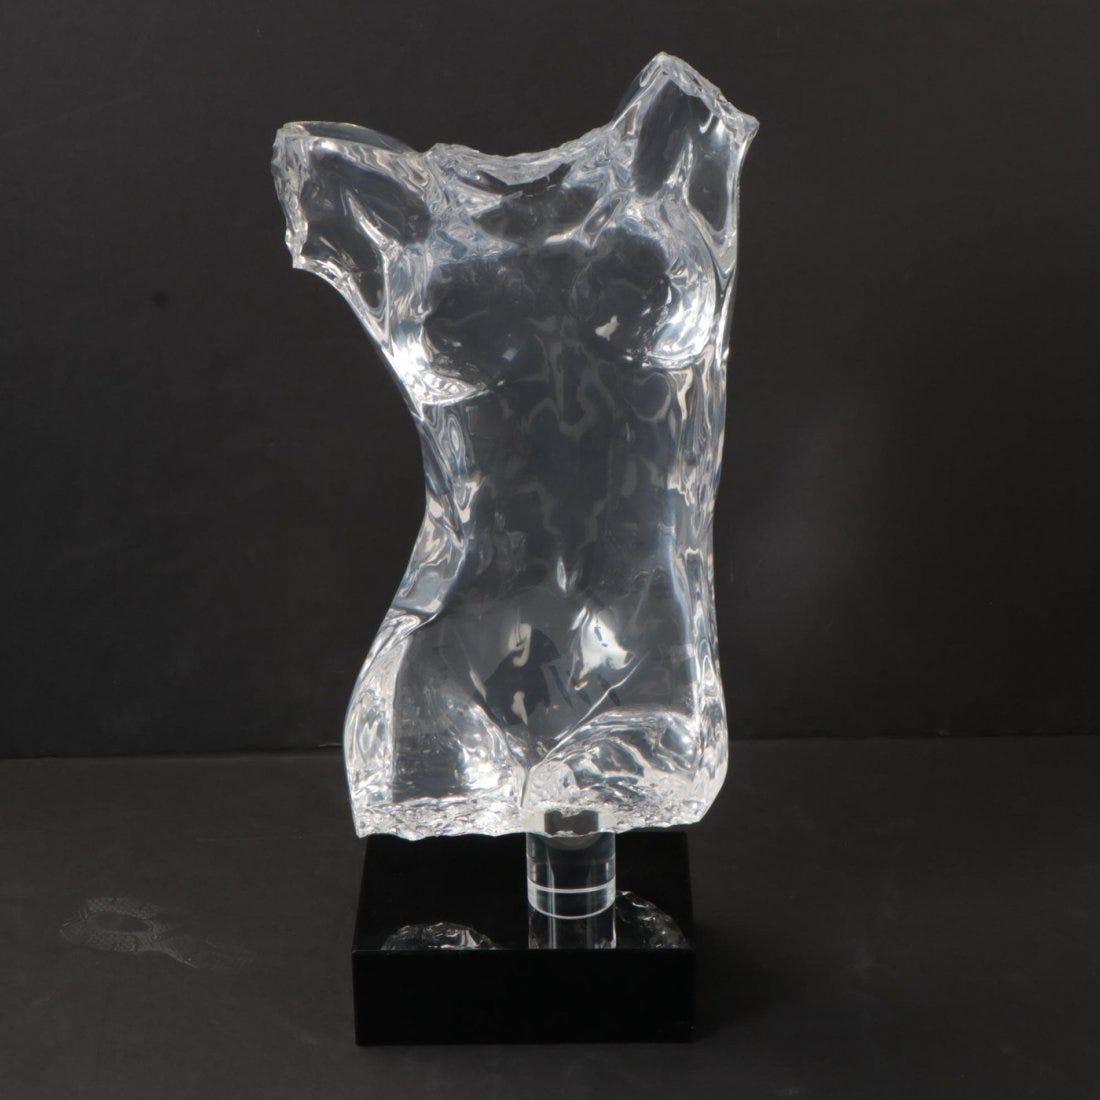 Introducing our stunning Mid-Century Modern Female Torso Sculpture, crafted meticulously in solid Lucite. This captivating art piece embodies the grace and beauty of the female form, offering a contemporary twist on classic mid-century